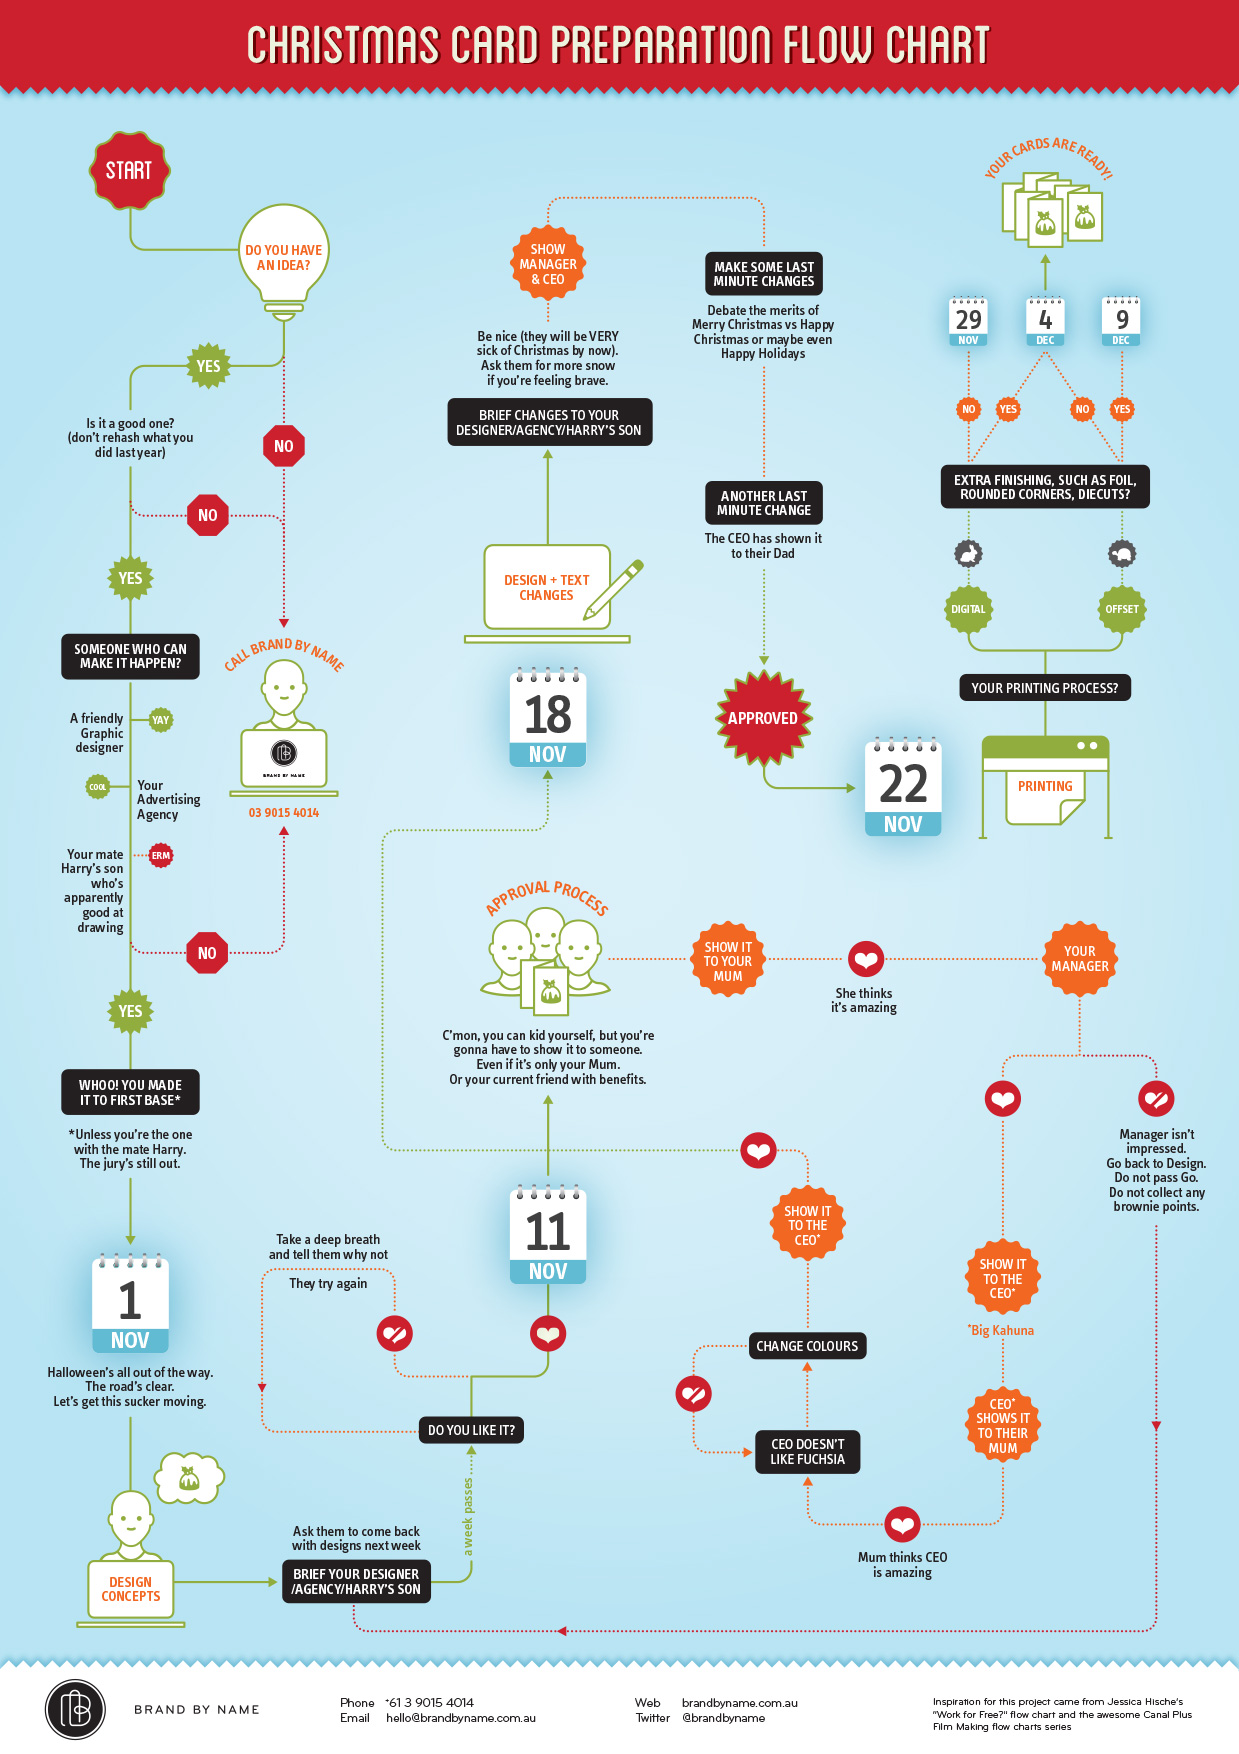 Christmas_Card_Preparation Flow Chart by Brand by Name